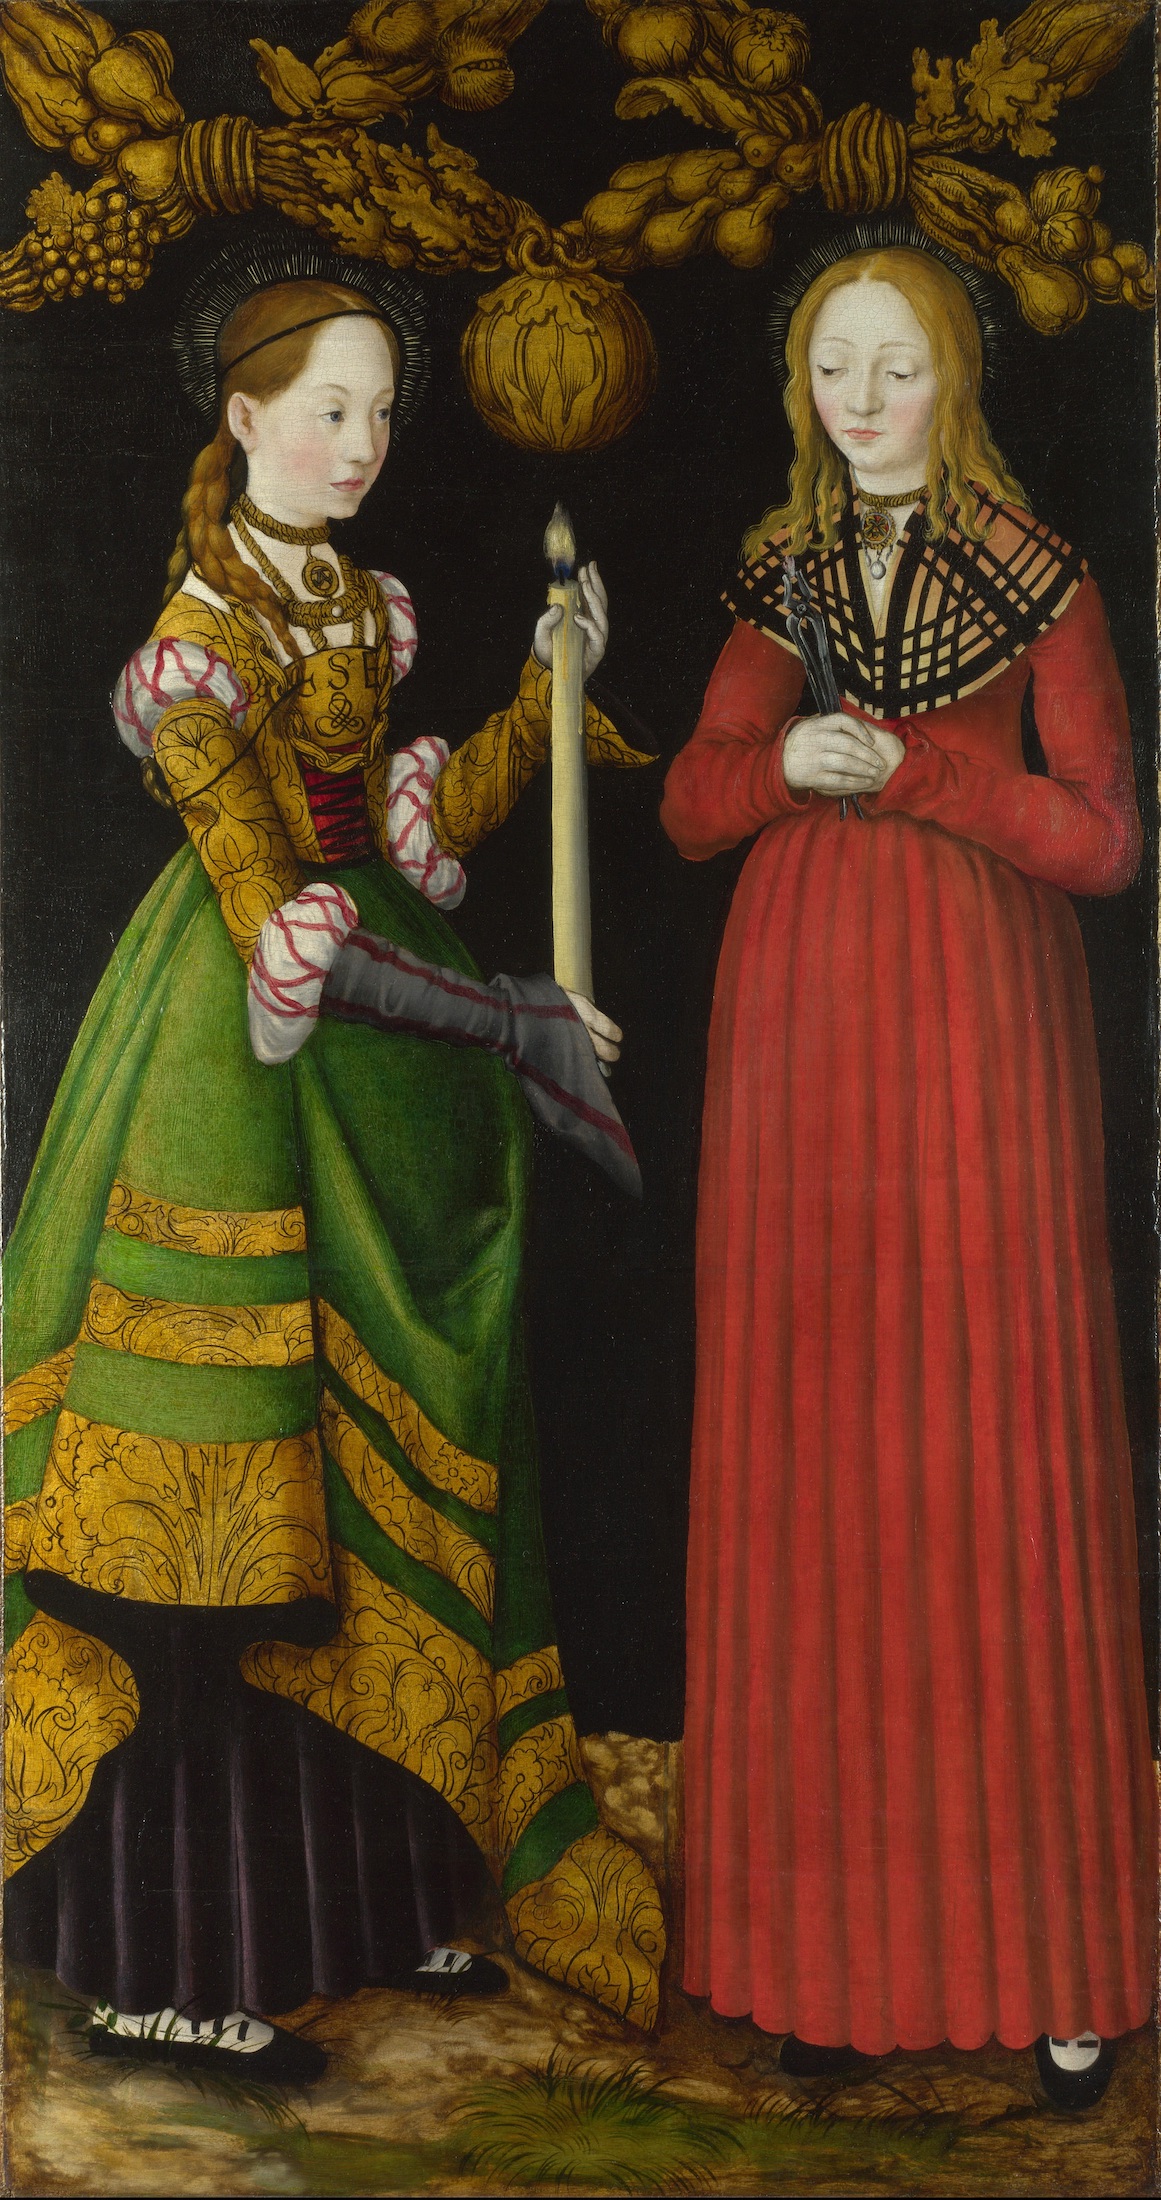 Saints Genevieve and Apollonia by Lucas Cranach the Elder - 1506 - 120.5 × 63 cm National Gallery